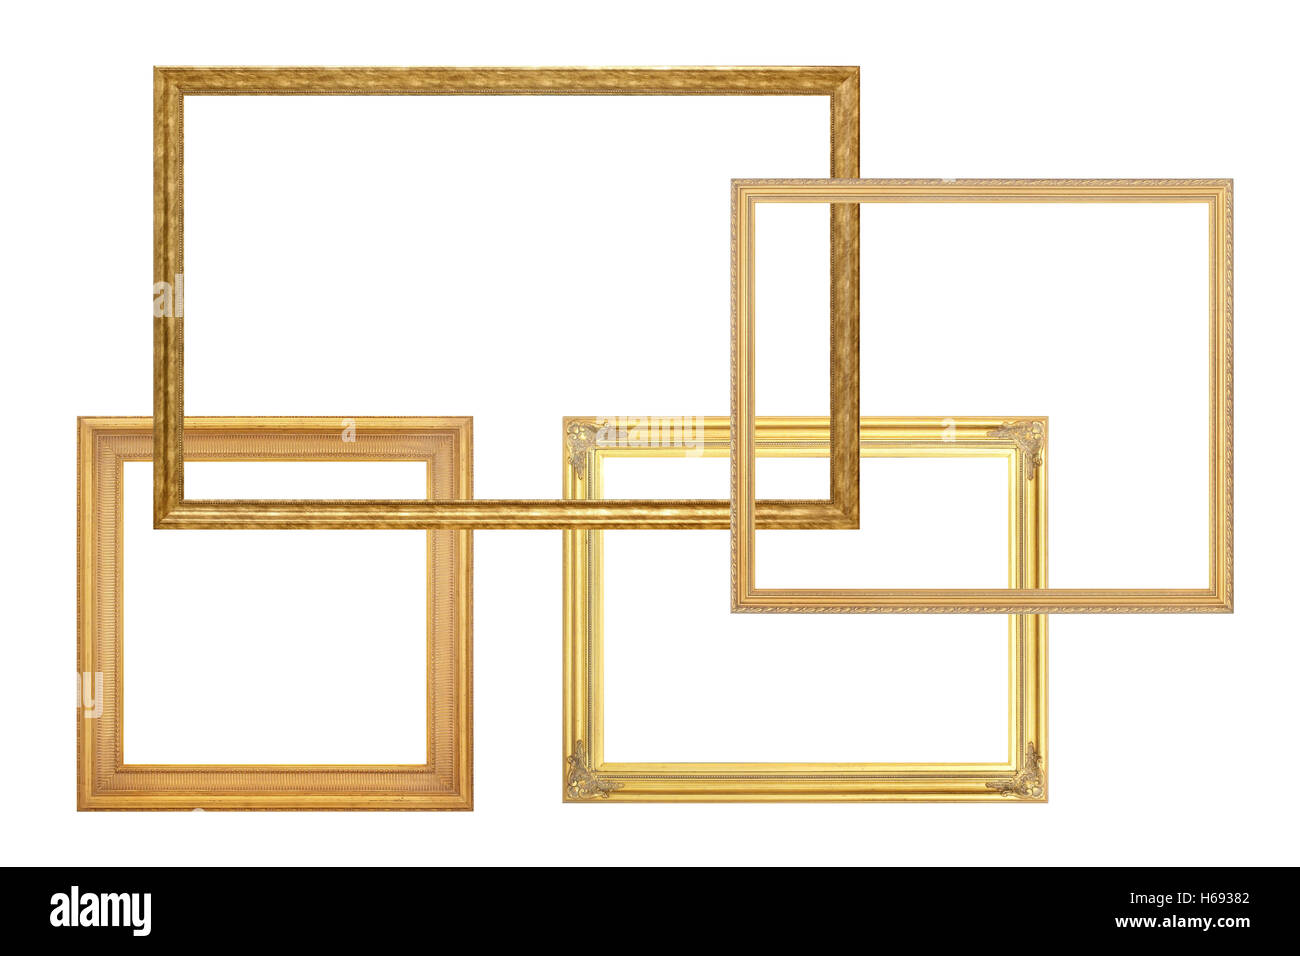 antique golden picture frame isolated on white background Stock Photo